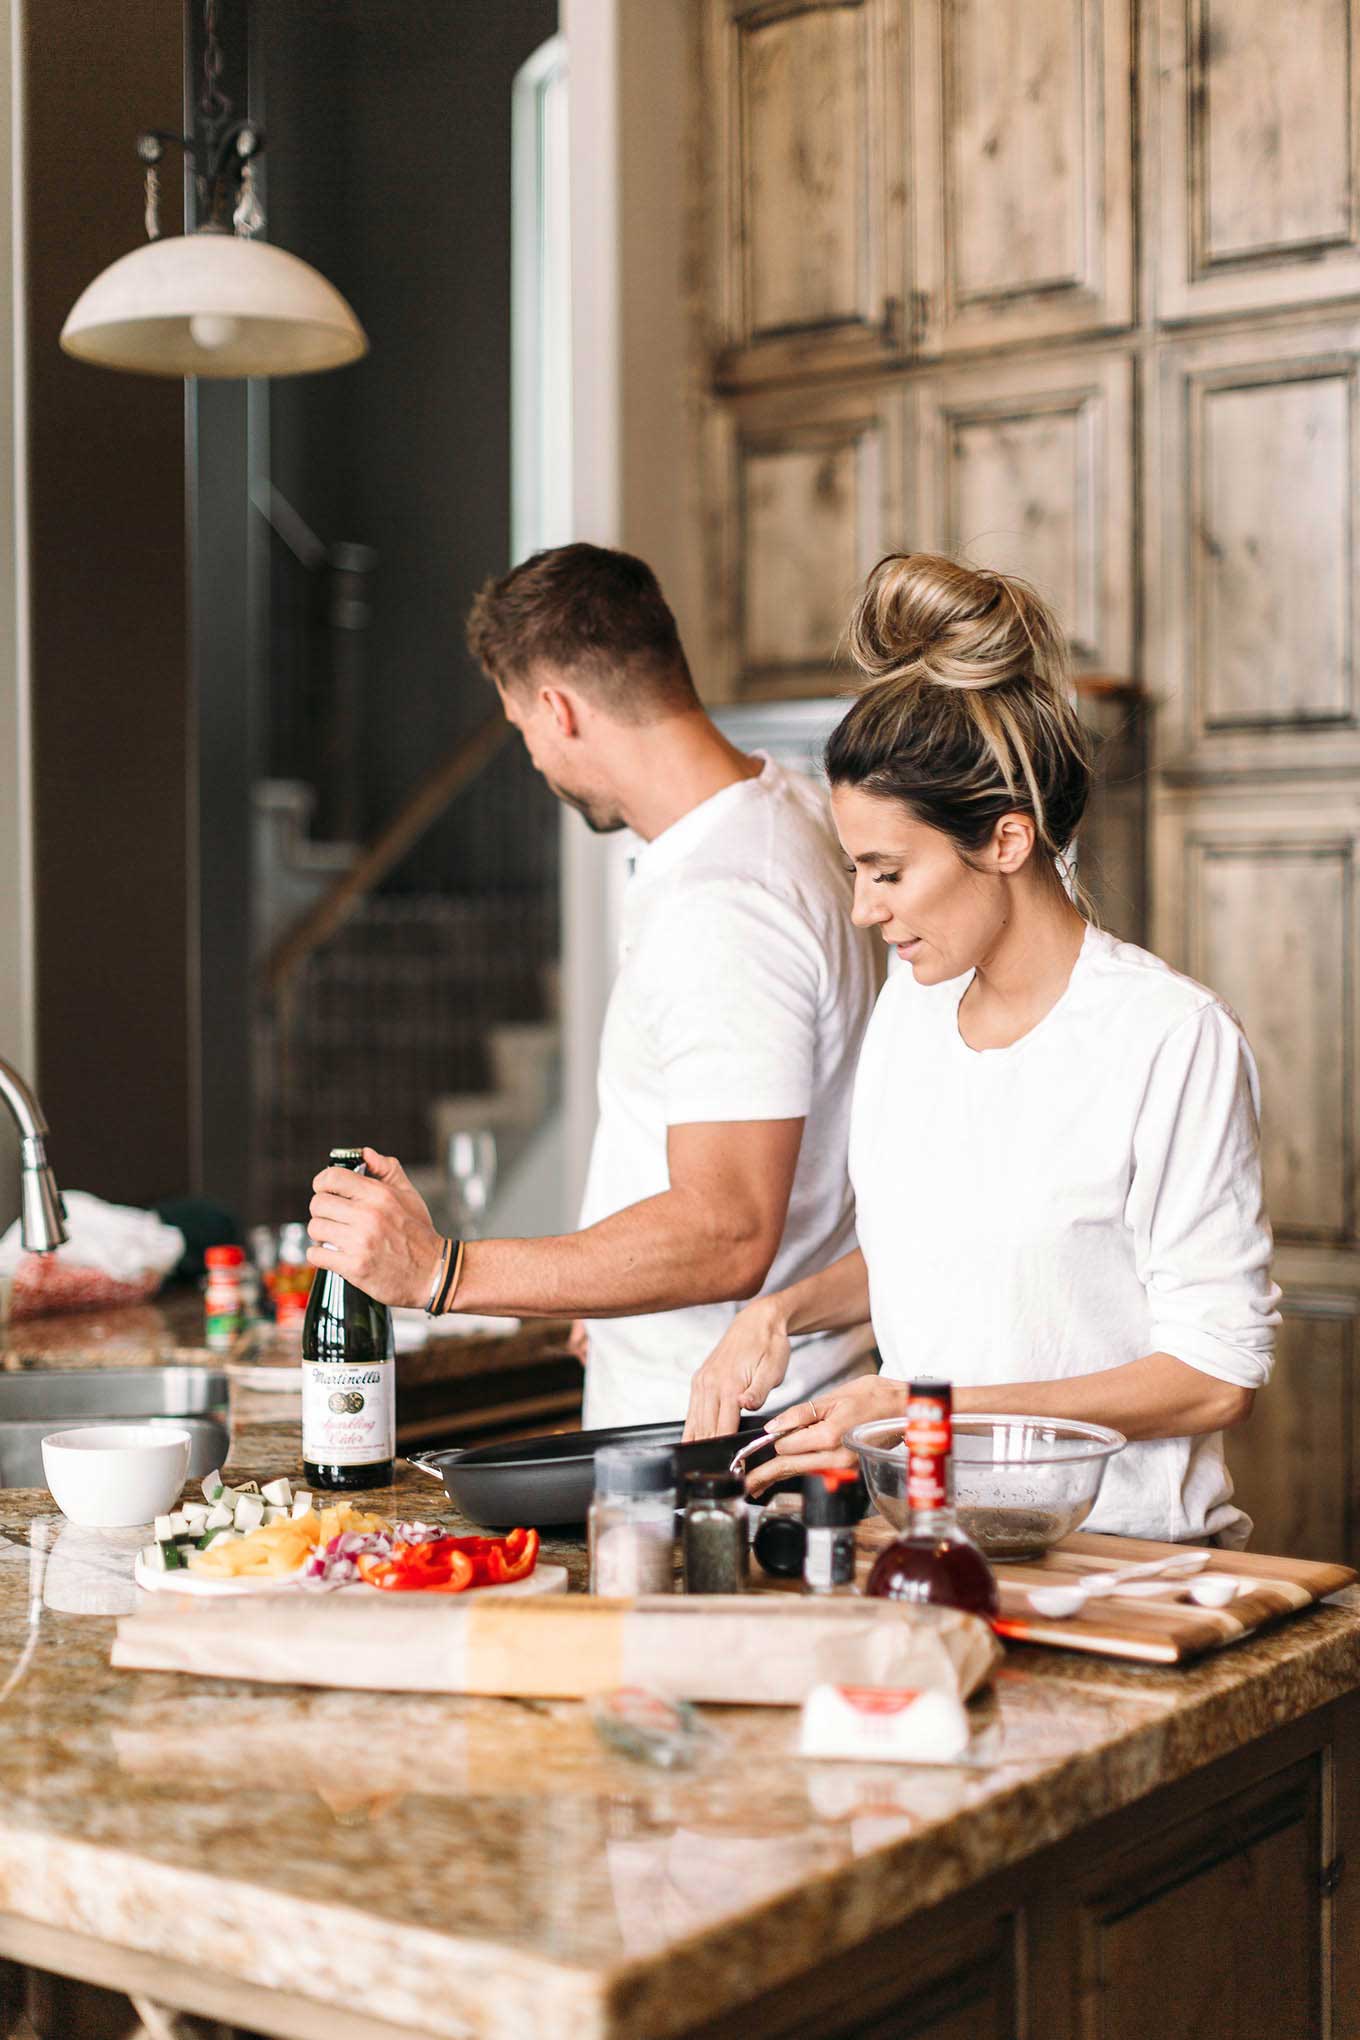 7 Fun Ideas for a Date Night At Home | Hello Fashion